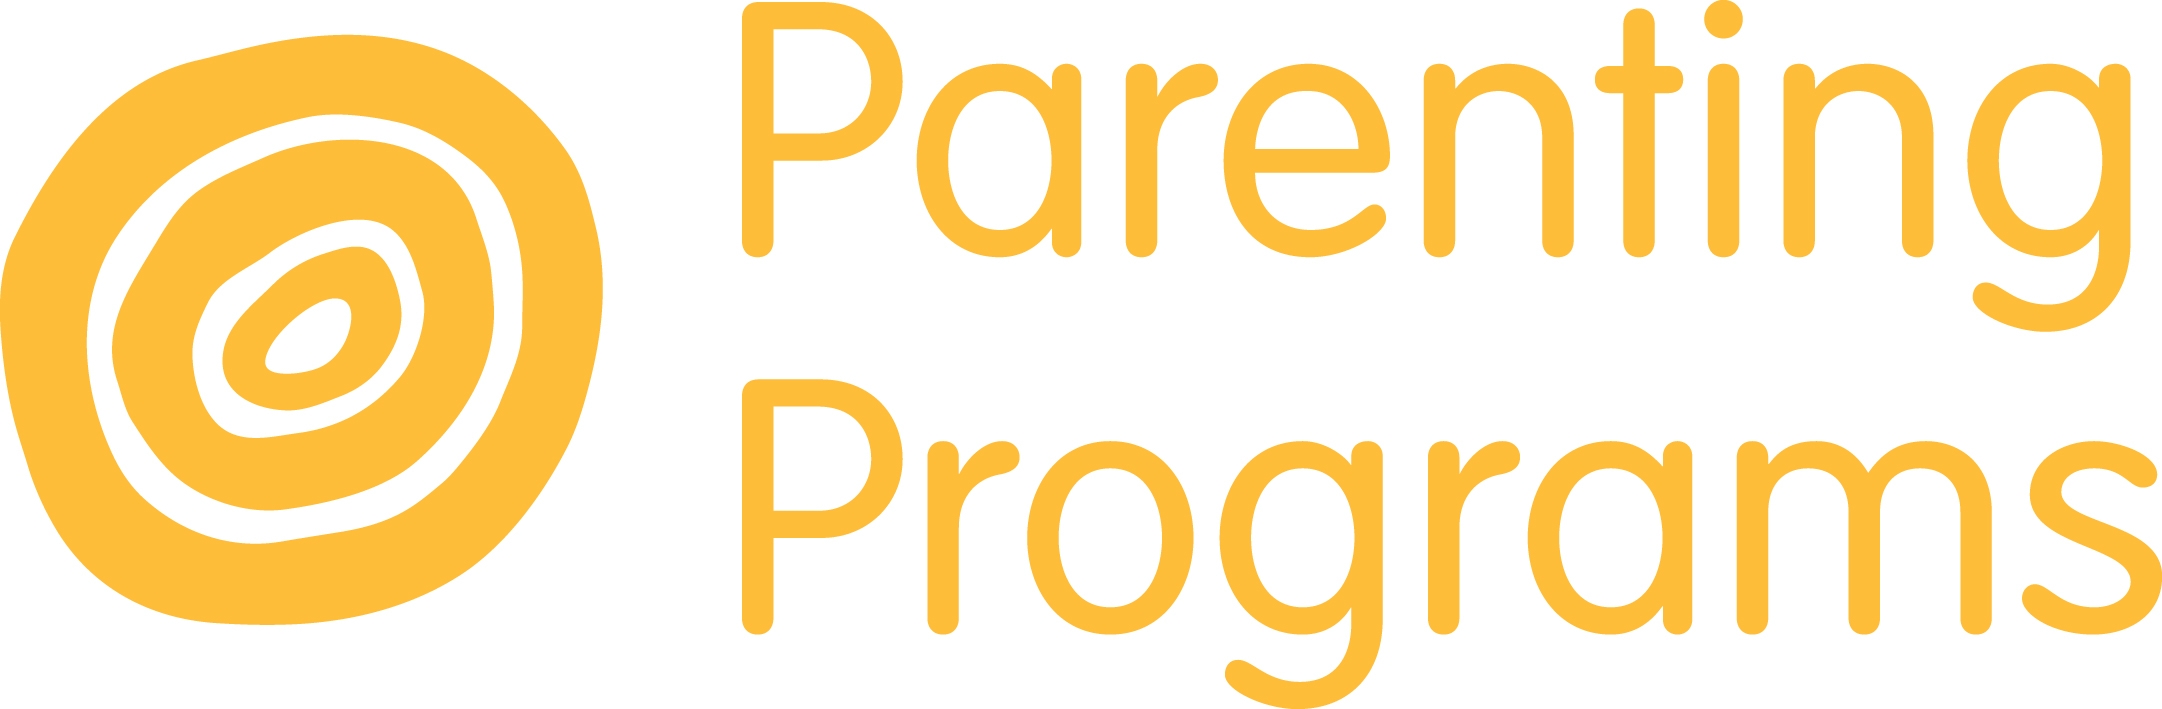 Whyalla Parenting Program